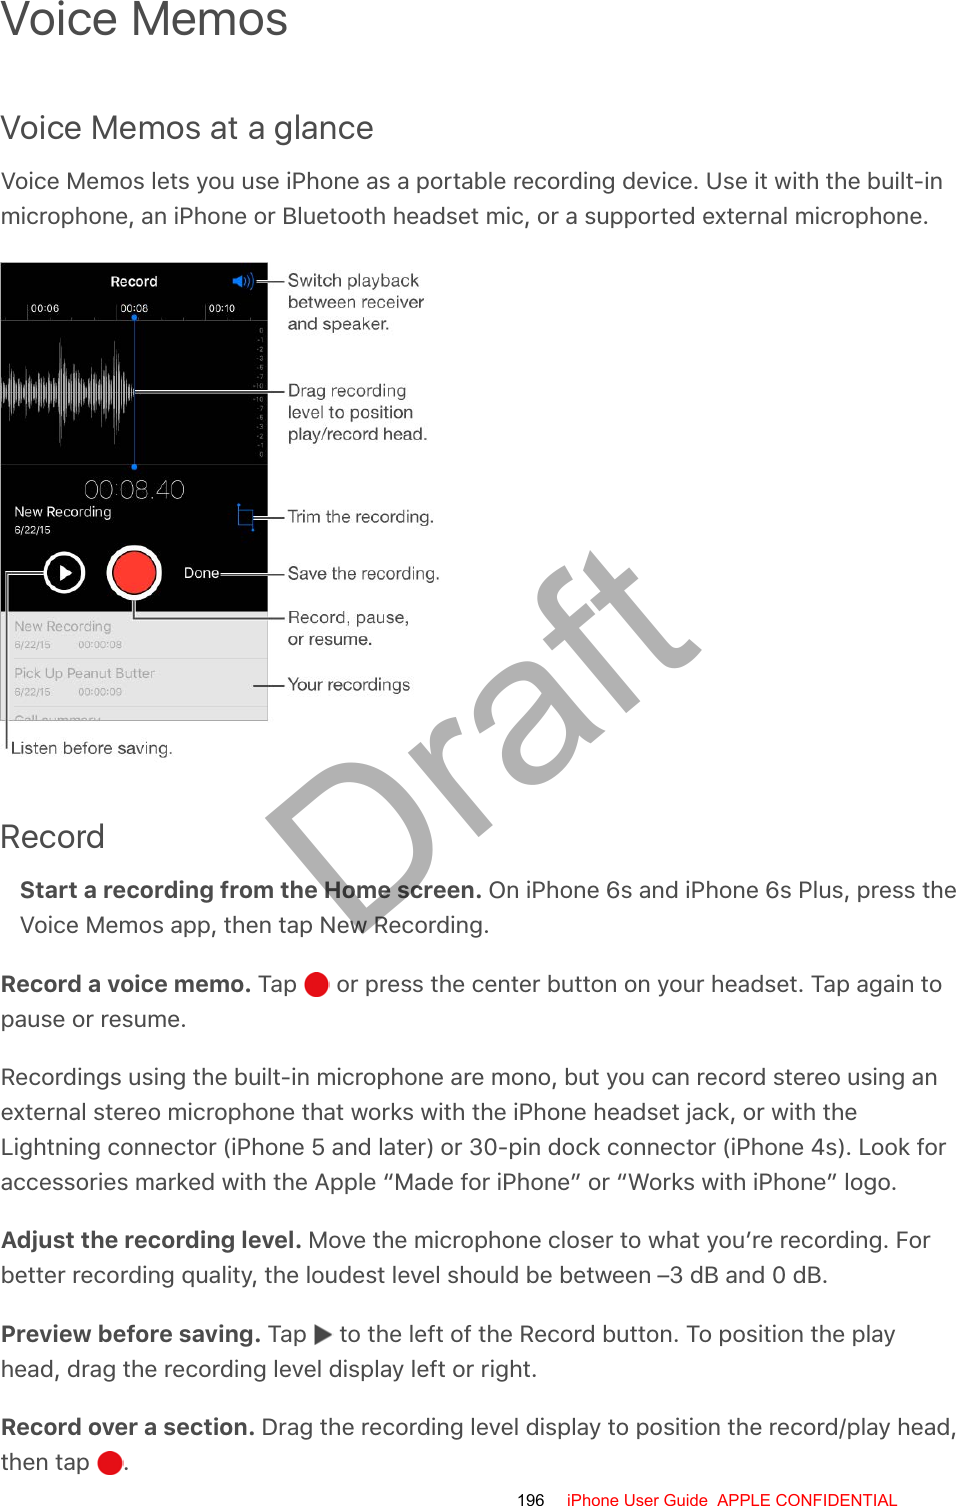 Voice MemosVoice Memos at a glanceVoice Memos lets you use iPhone as a portable recording device. Use it with the built-inmicrophone, an iPhone or Bluetooth headset mic, or a supported external microphone.RecordStart a recording from the Home screen. On iPhone 6s and iPhone 6s Plus, press theVoice Memos app, then tap New Recording.Record a voice memo. Tap   or press the center button on your headset. Tap again topause or resume.Recordings using the built-in microphone are mono, but you can record stereo using anexternal stereo microphone that works with the iPhone headset jack, or with theLightning connector (iPhone 5 and later) or 30-pin dock connector (iPhone 4s). Look foraccessories marked with the Apple “Made for iPhone” or “Works with iPhone” logo.Adjust the recording level. Move the microphone closer to what you’re recording. Forbetter recording quality, the loudest level should be between –3 dB and 0 dB.Preview before saving. Tap   to the left of the Record button. To position the playhead, drag the recording level display left or right.Record over a section. Drag the recording level display to position the record/play head,then tap  .196 iPhone User Guide  APPLE CONFIDENTIALDraft